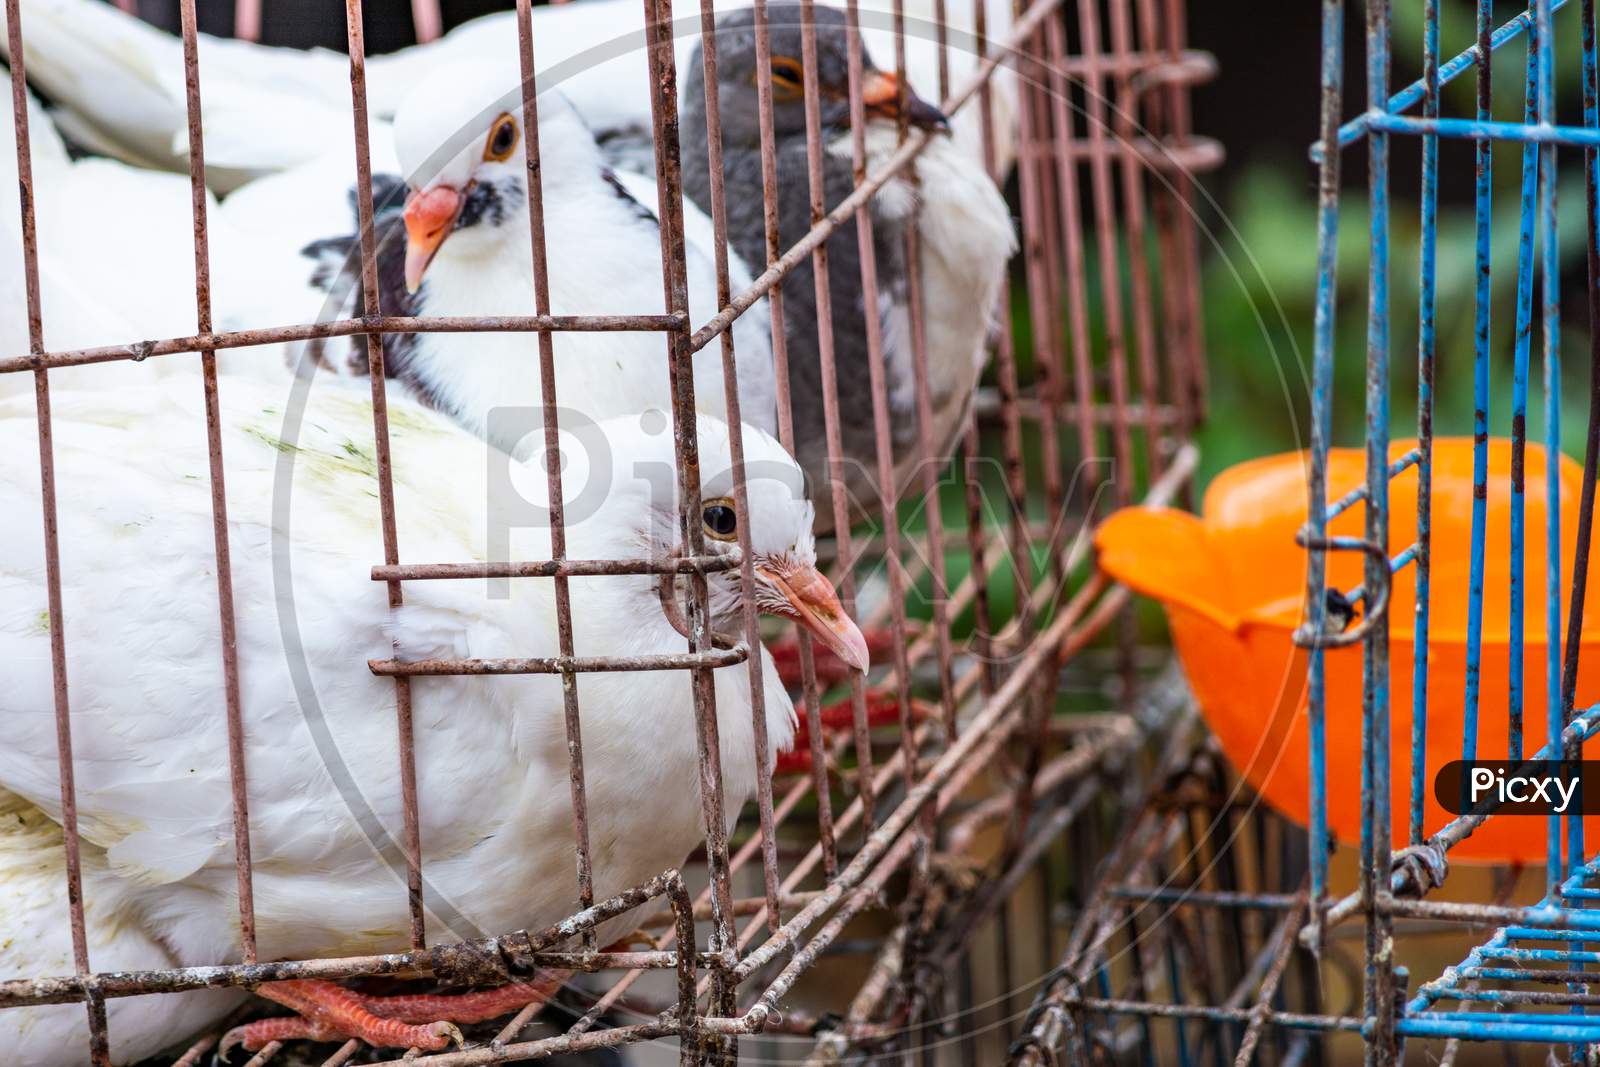 White Pigeon Doves In A Metal Wire Cage, On Sale At Market In Qingdao, China